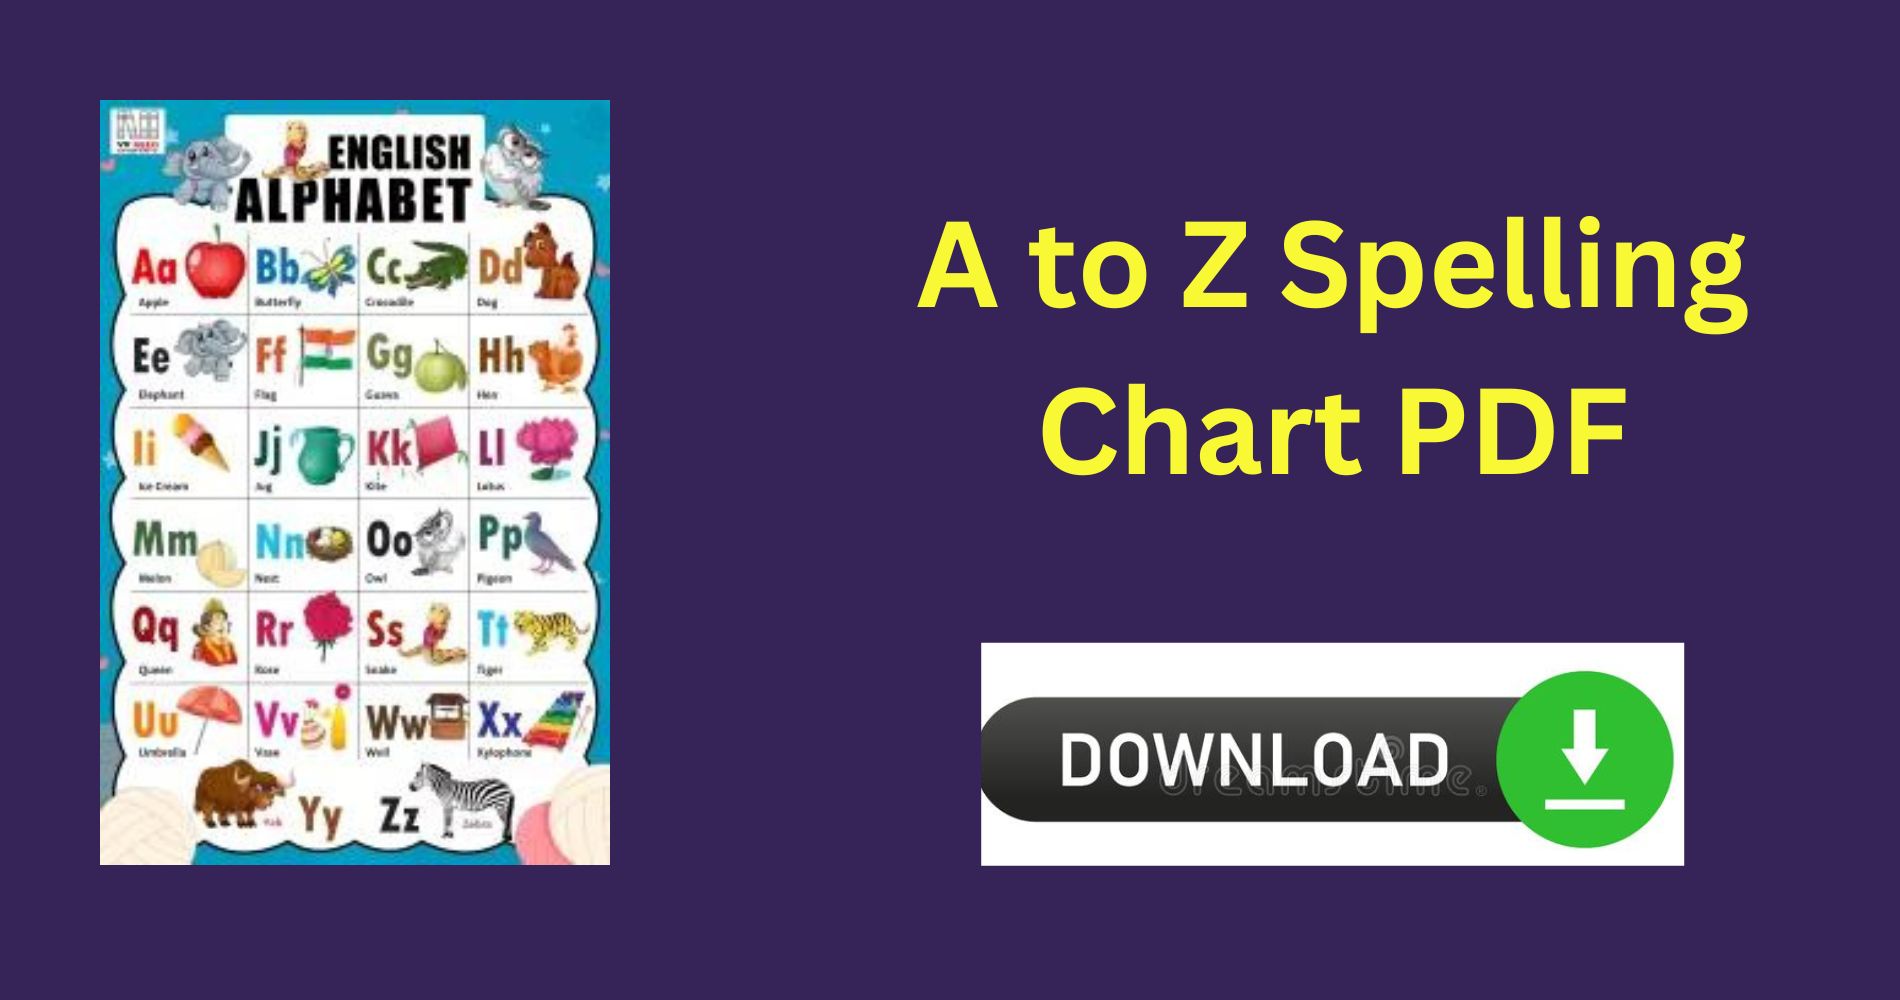 A to Z Spelling Chart PDF